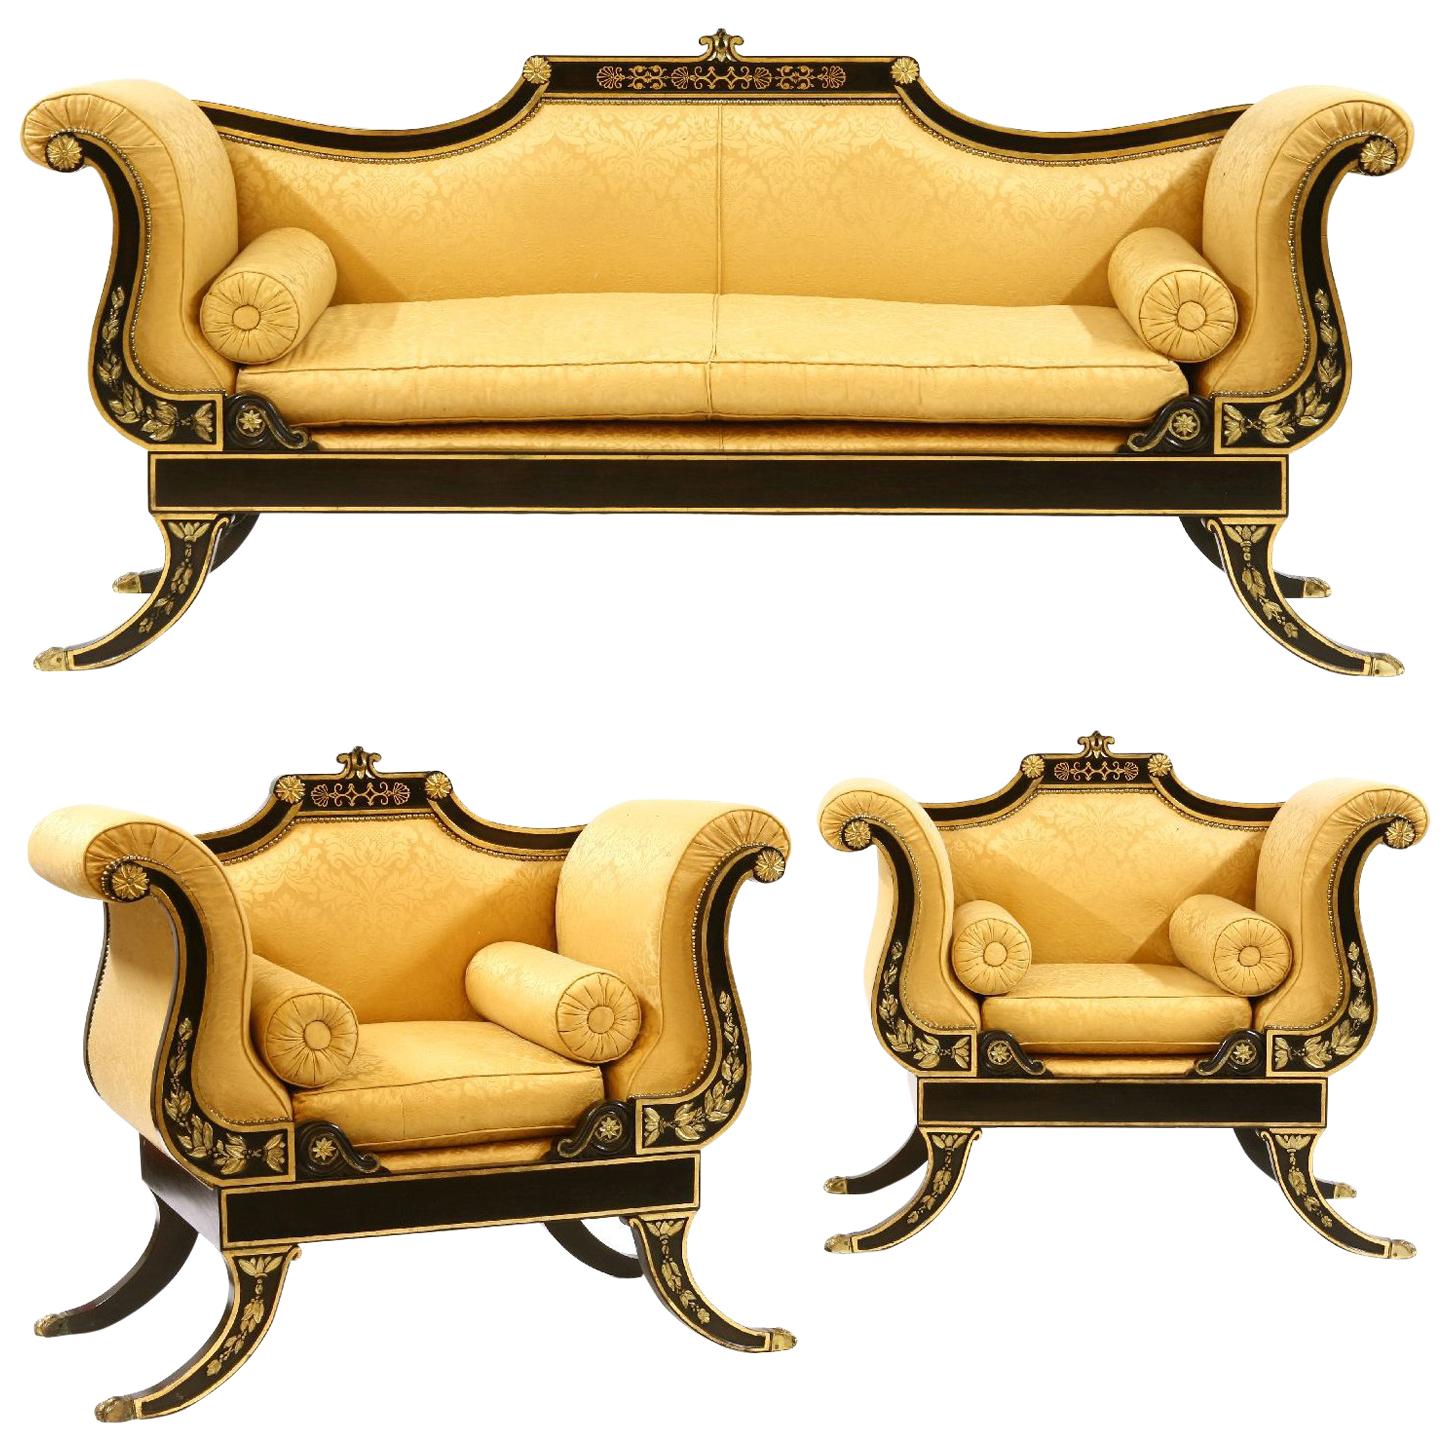 20th Century English Regency Ebonised and Parcel-Gilt Couch & Pair of Armchairs